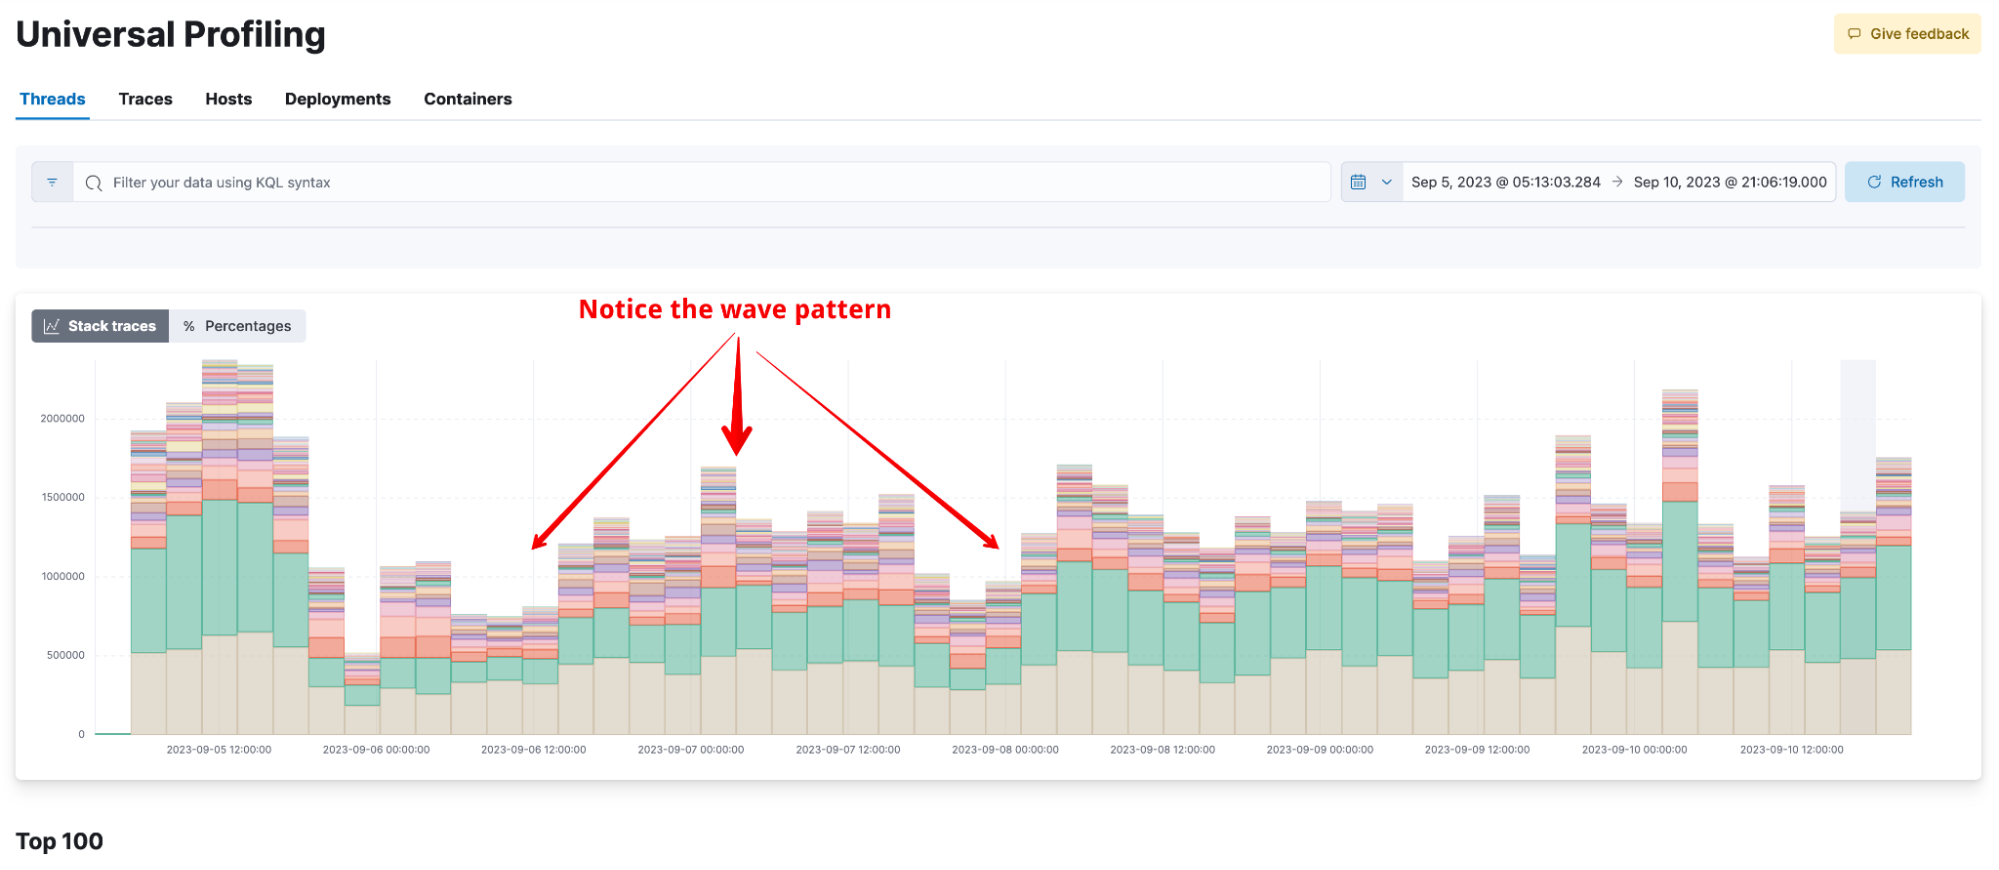 Notice the wave pattern in the stacktrace view, enabling you to drill down into a CPU spike 